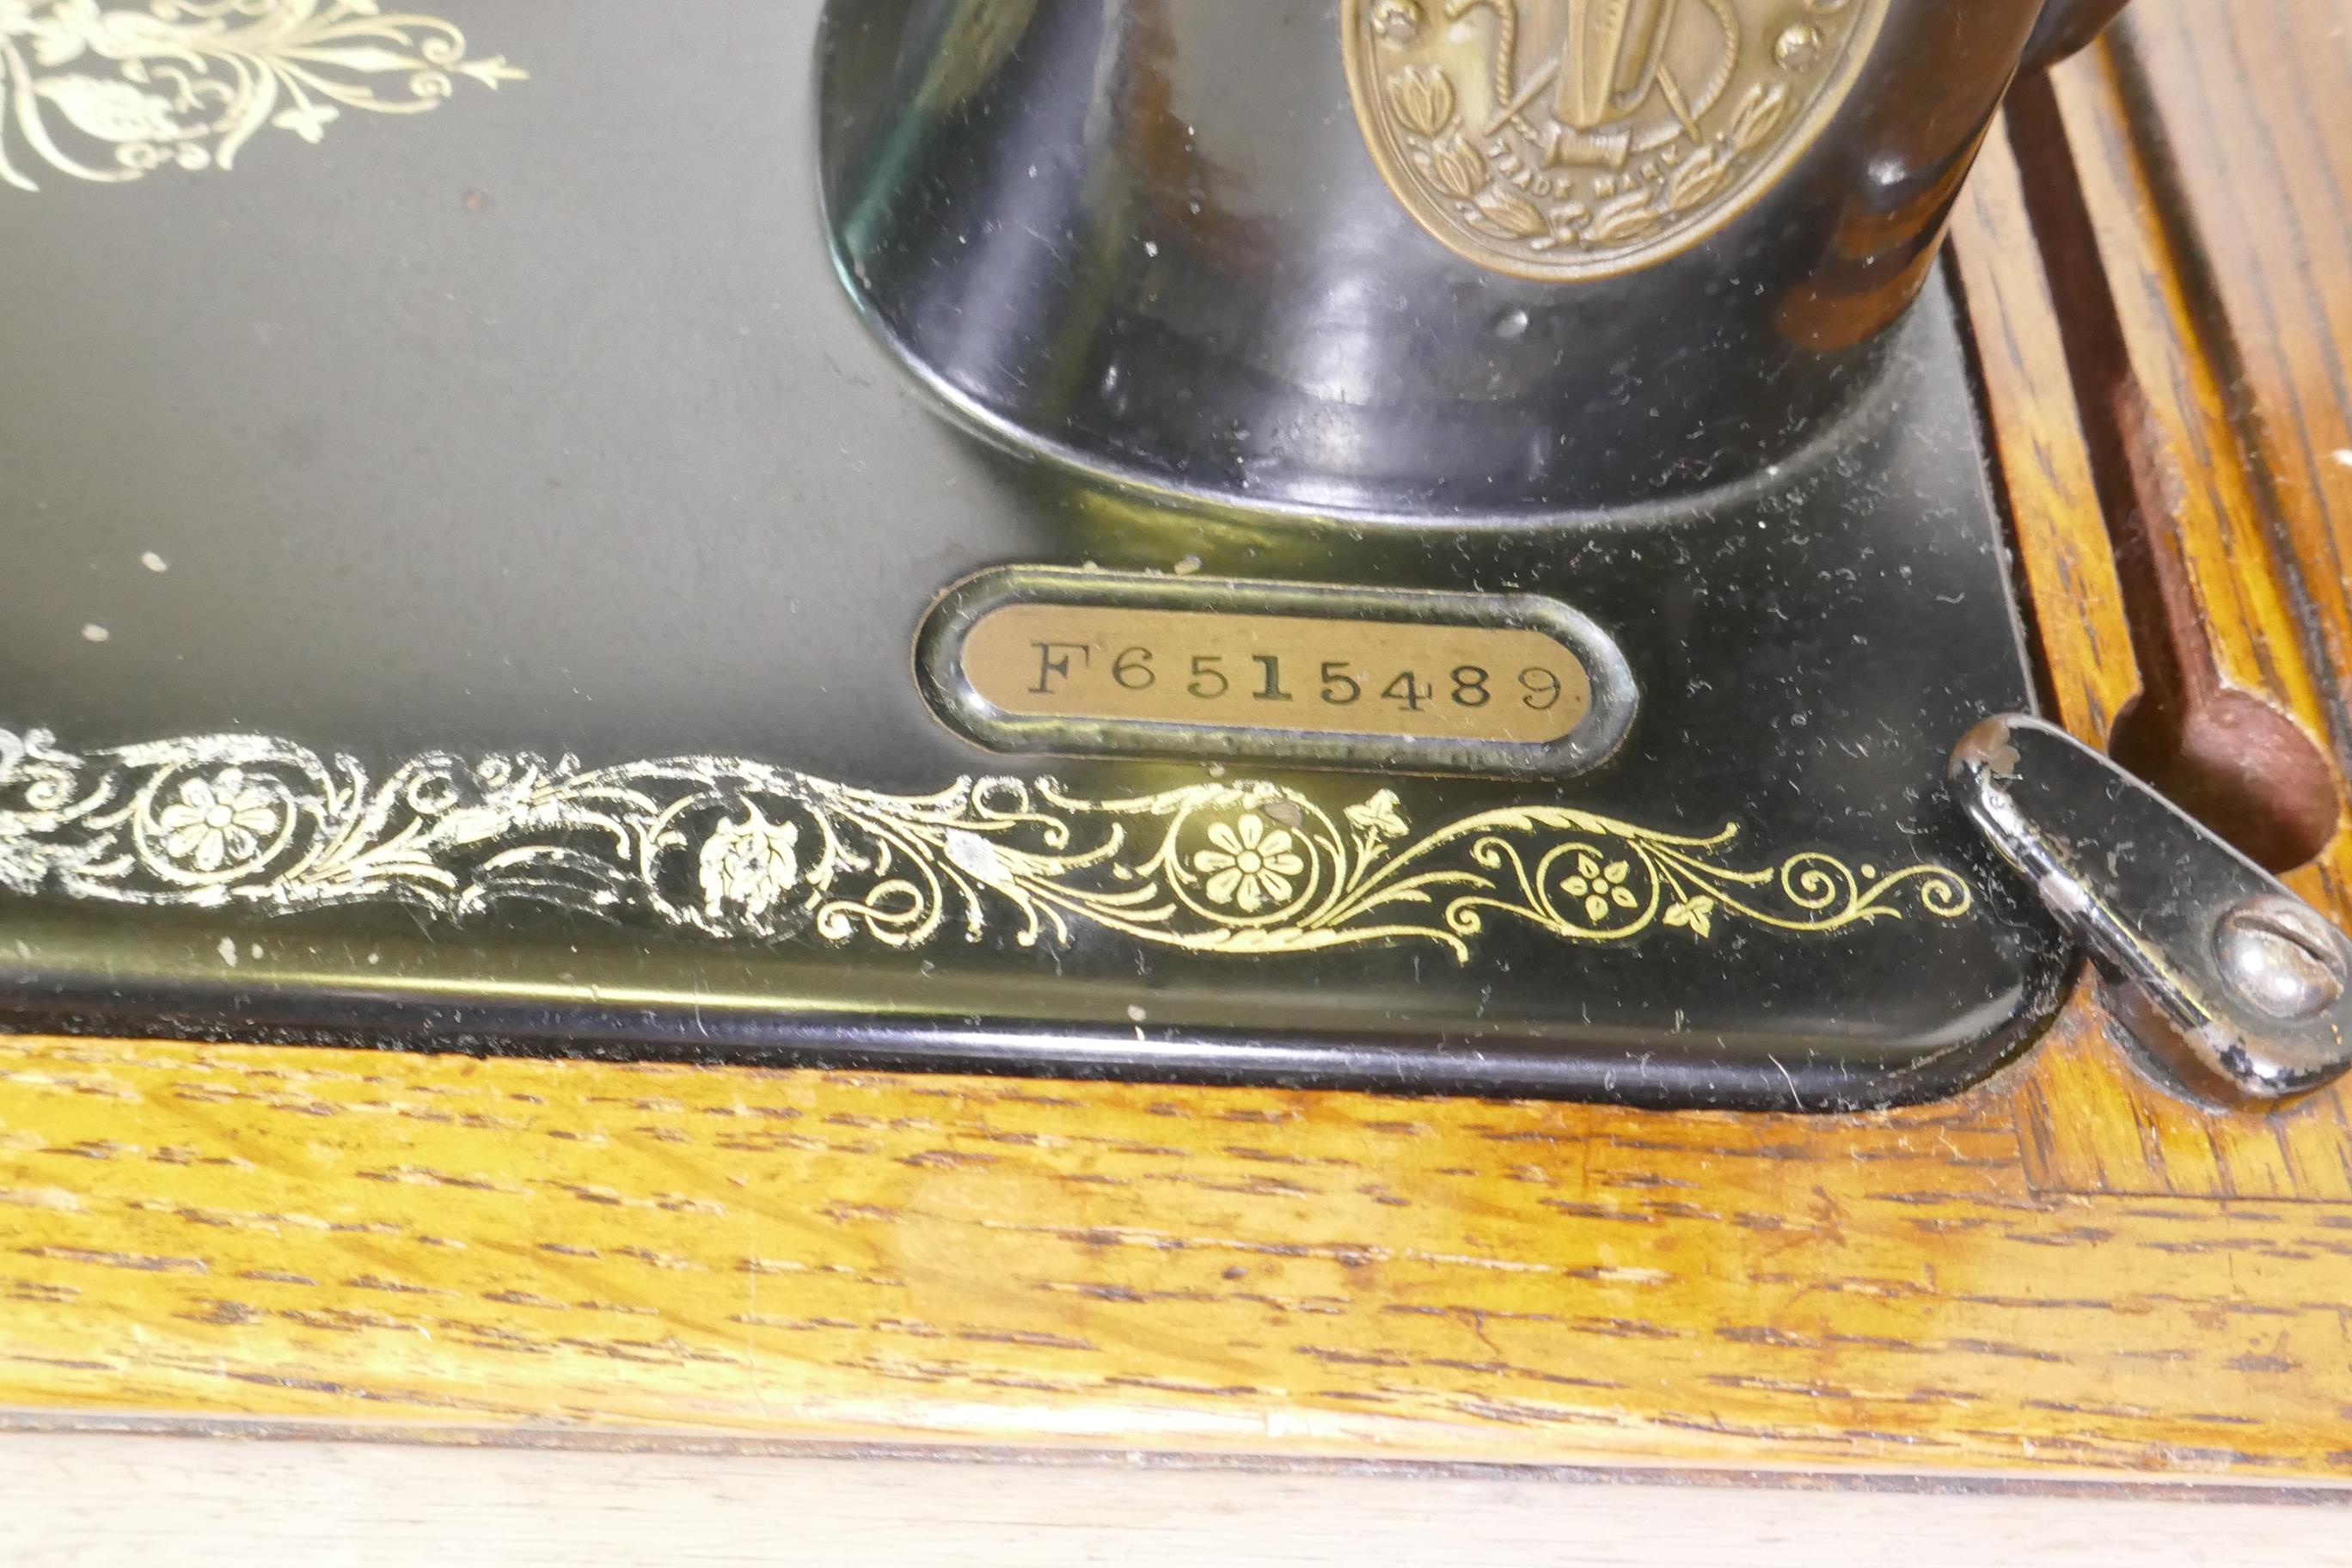 A Singer hand cranked sewing machine, No F6515489, in an oak case - Image 2 of 3